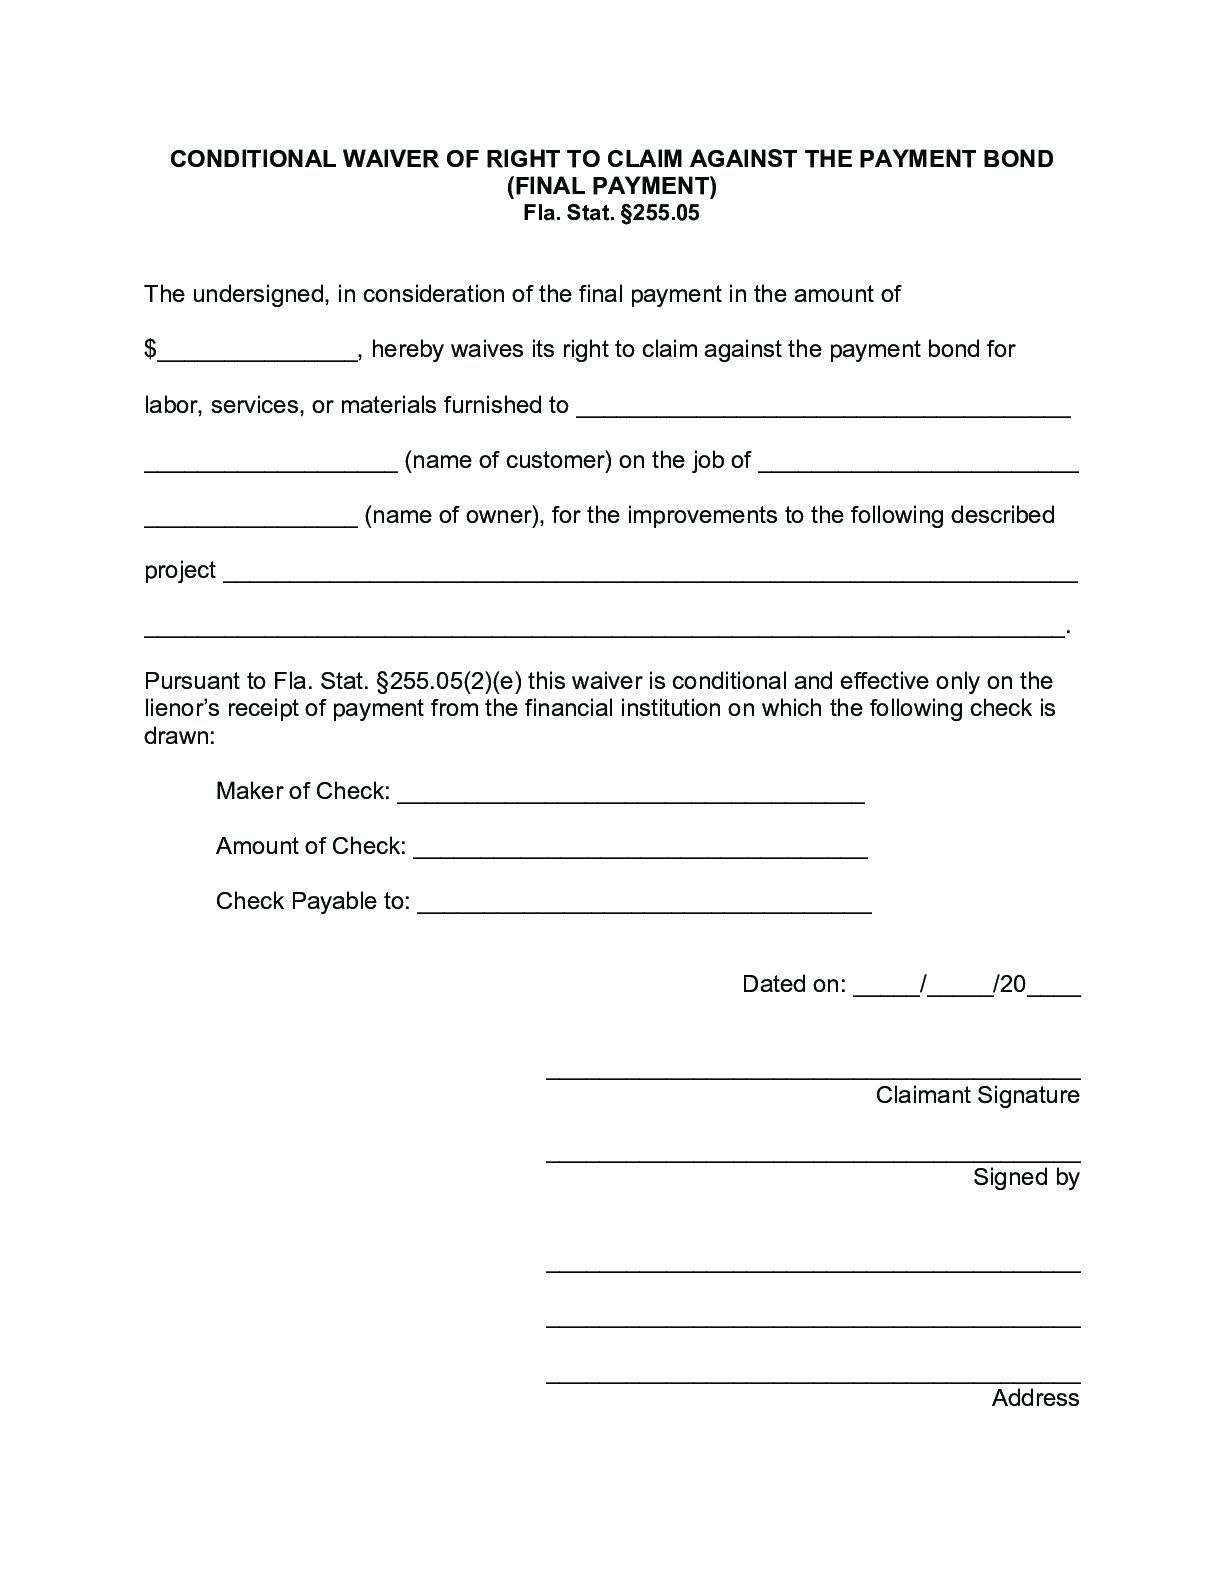 Florida Final Conditional Bond Waiver Form | Free Template Download - free from